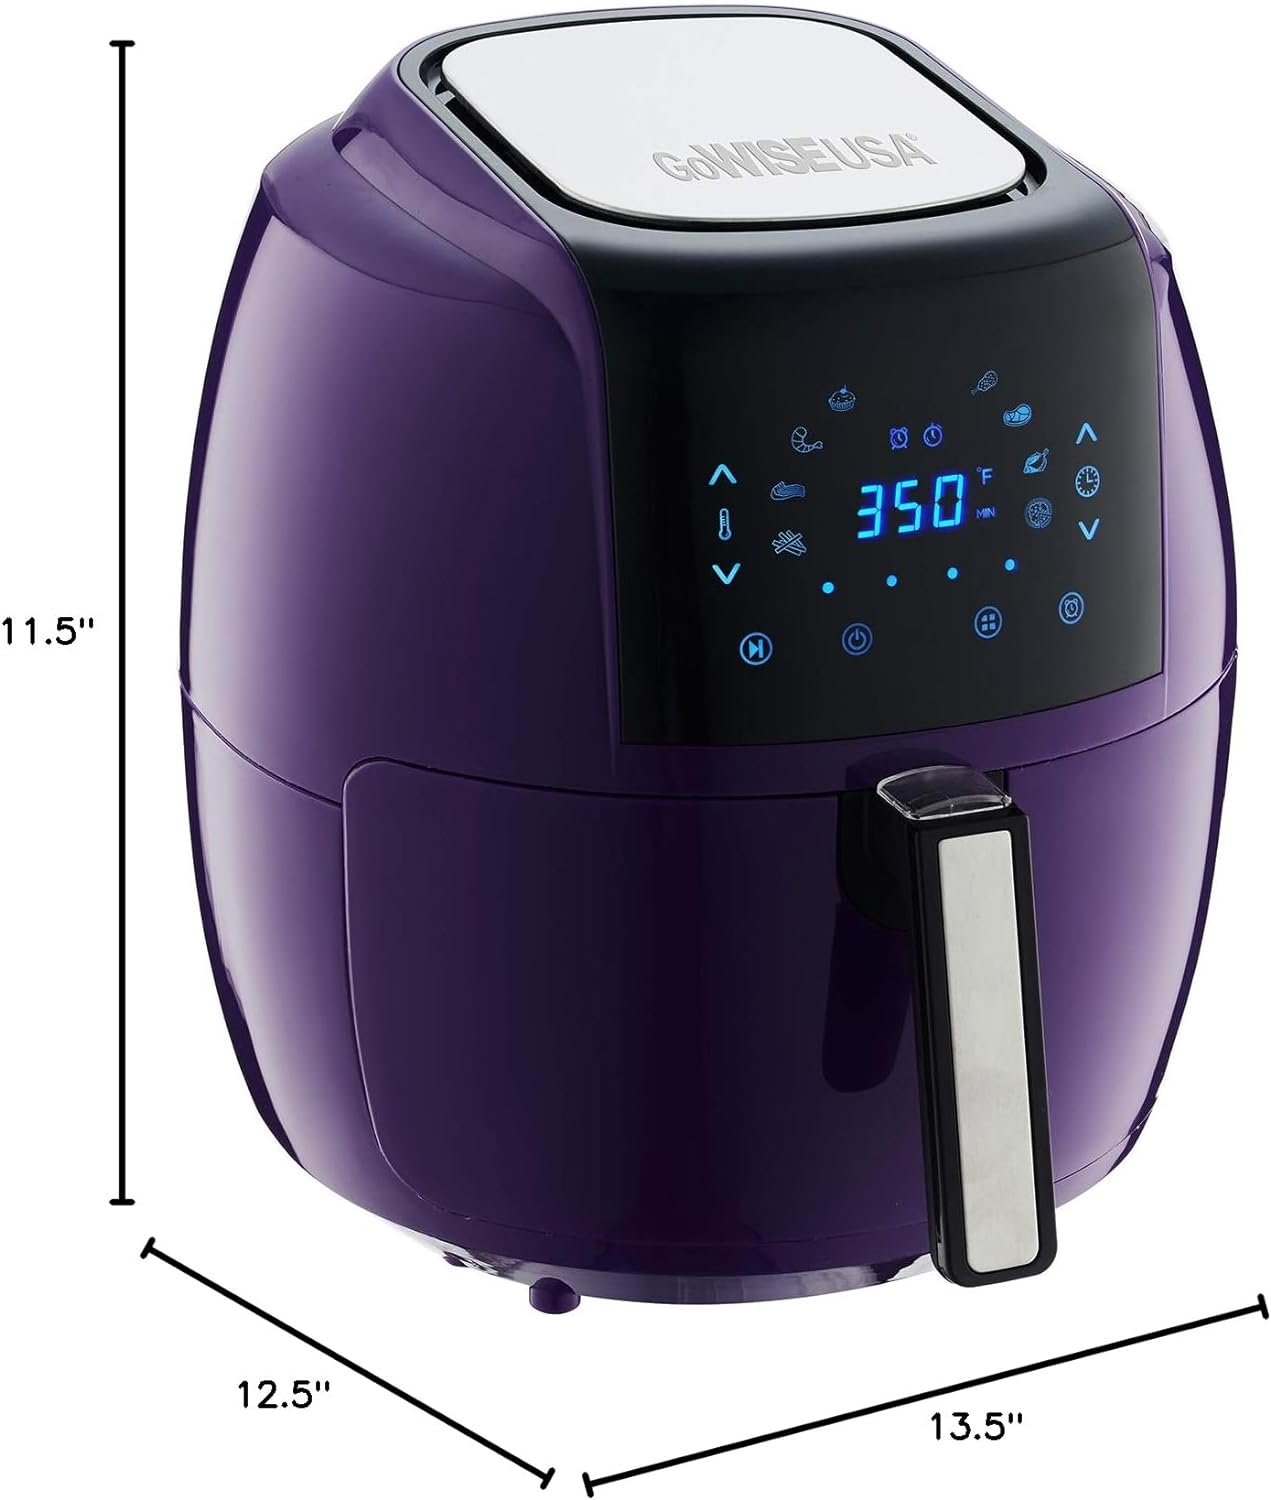 GoWISE USA 5.8-Quart Programmable 8-in-1 Air Fryer XL + Recipe Book (Plum)